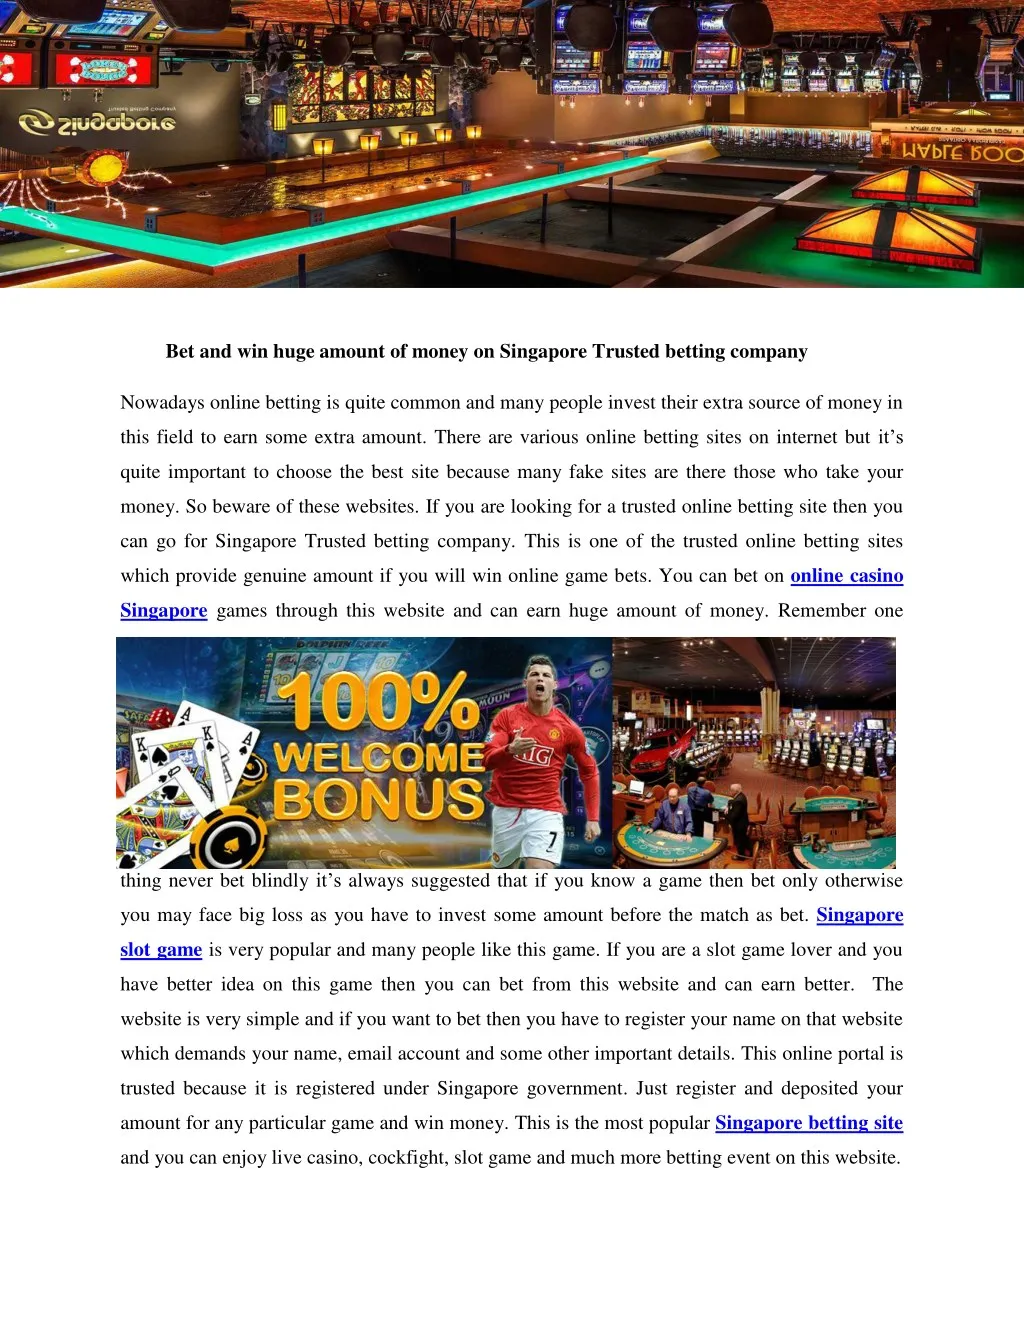 bet and win huge amount of money on singapore n.